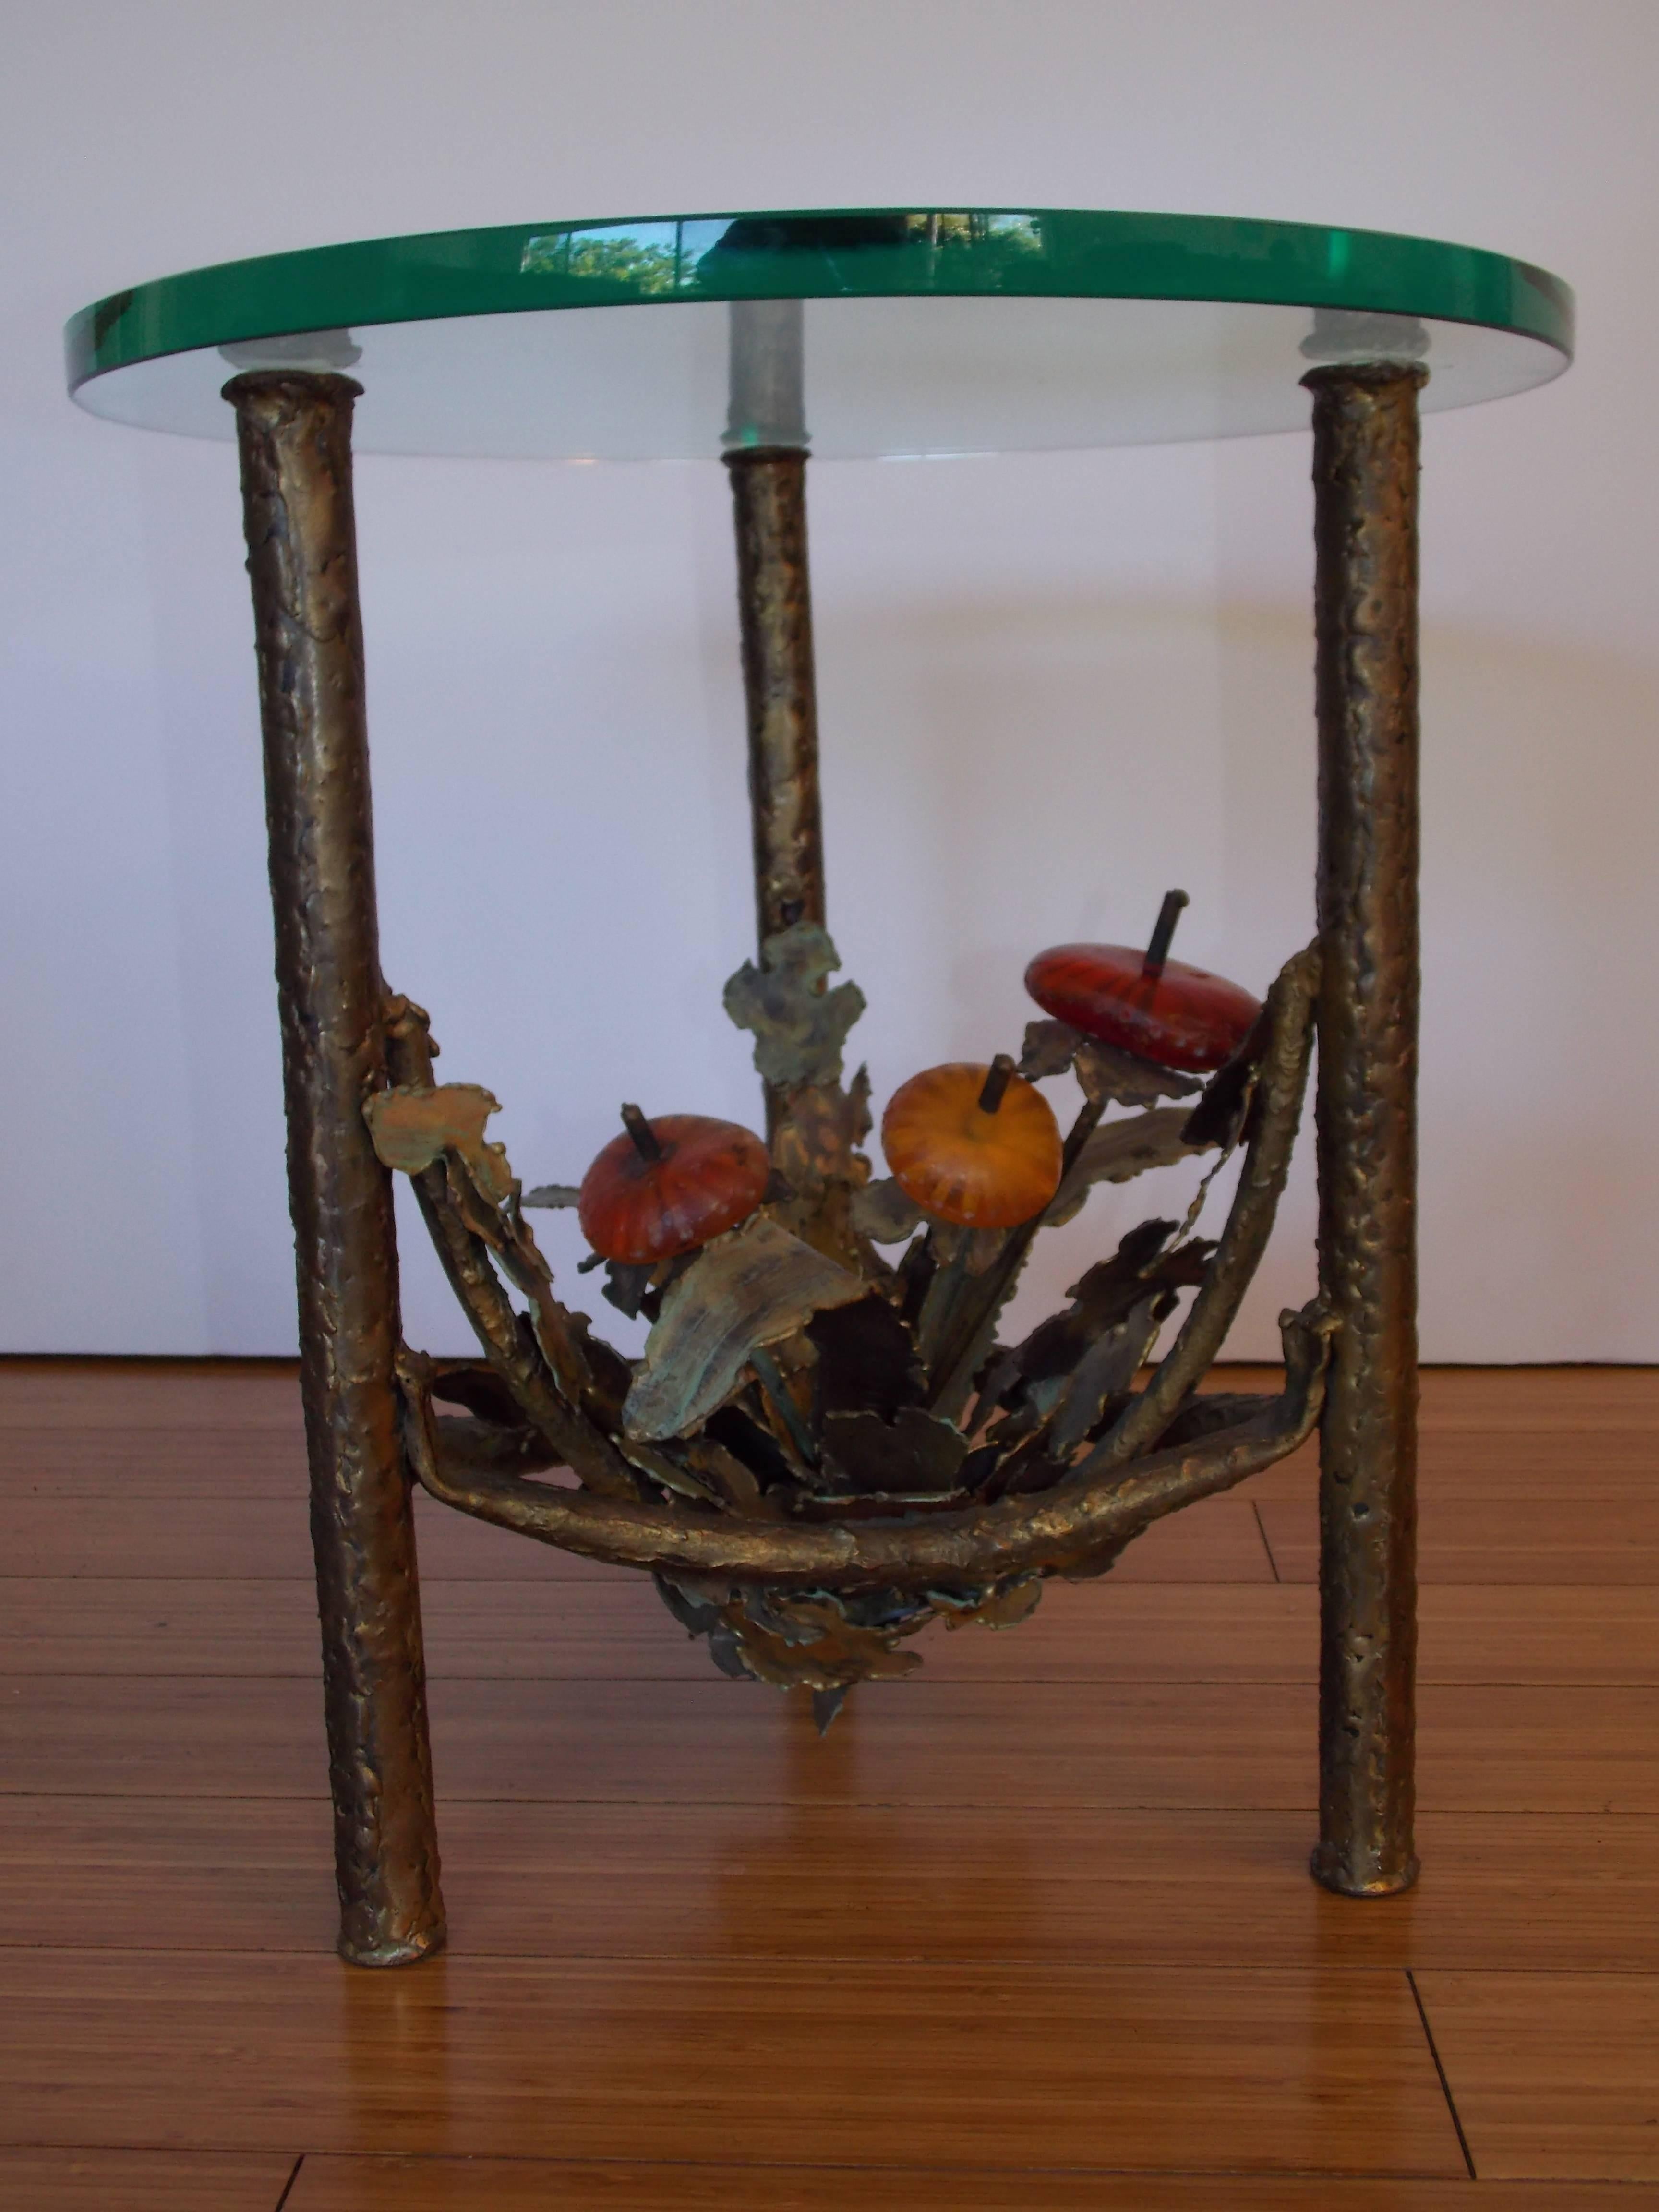 A fun design for any interior.
Made of torch cut bronze plant forms with resin bulbs detailing and bronze-plated steel base with original glass top (faint scratch) no chips.
In great used / vintage condition.
No damage or repairs.

 